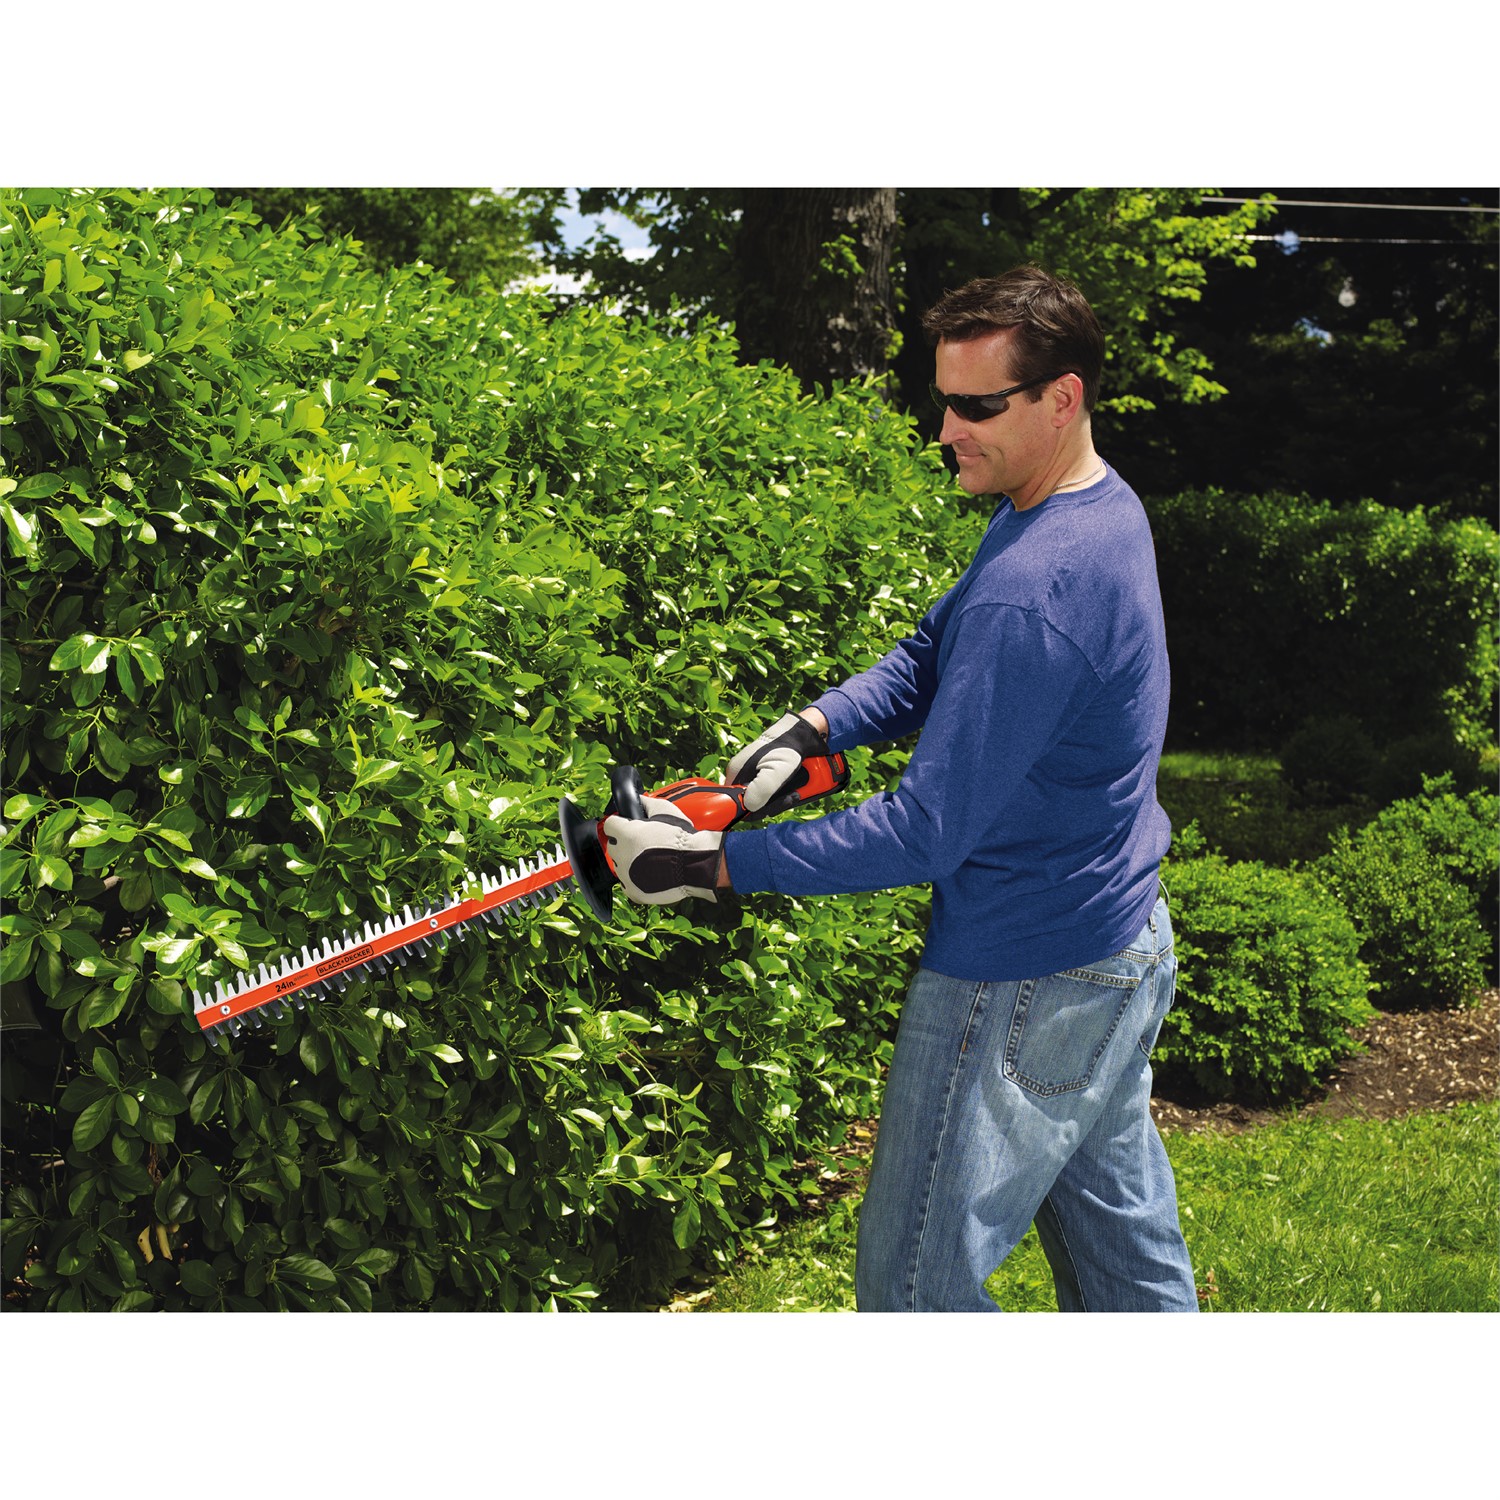 BLACK+DECKER LHT2436 40V MAX* Lithium-Ion 24" Cordless Hedge Trimmer, Battery and Charger Included - image 4 of 6